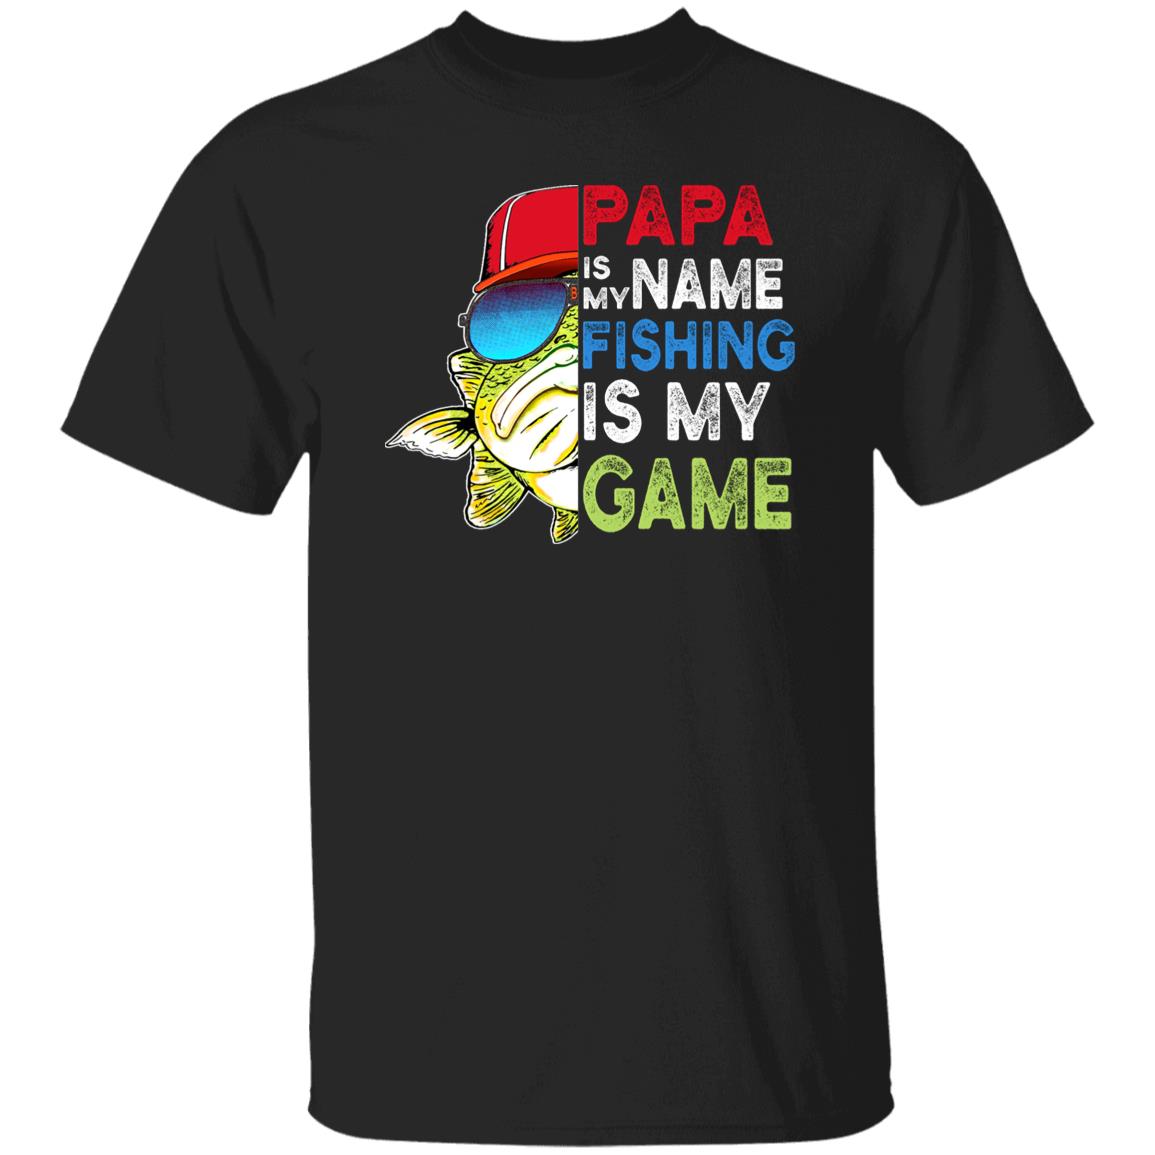 Papa is my name fishing is my game shirt gift for dad Black Navy Dark Heather-Family-Gift-Planet